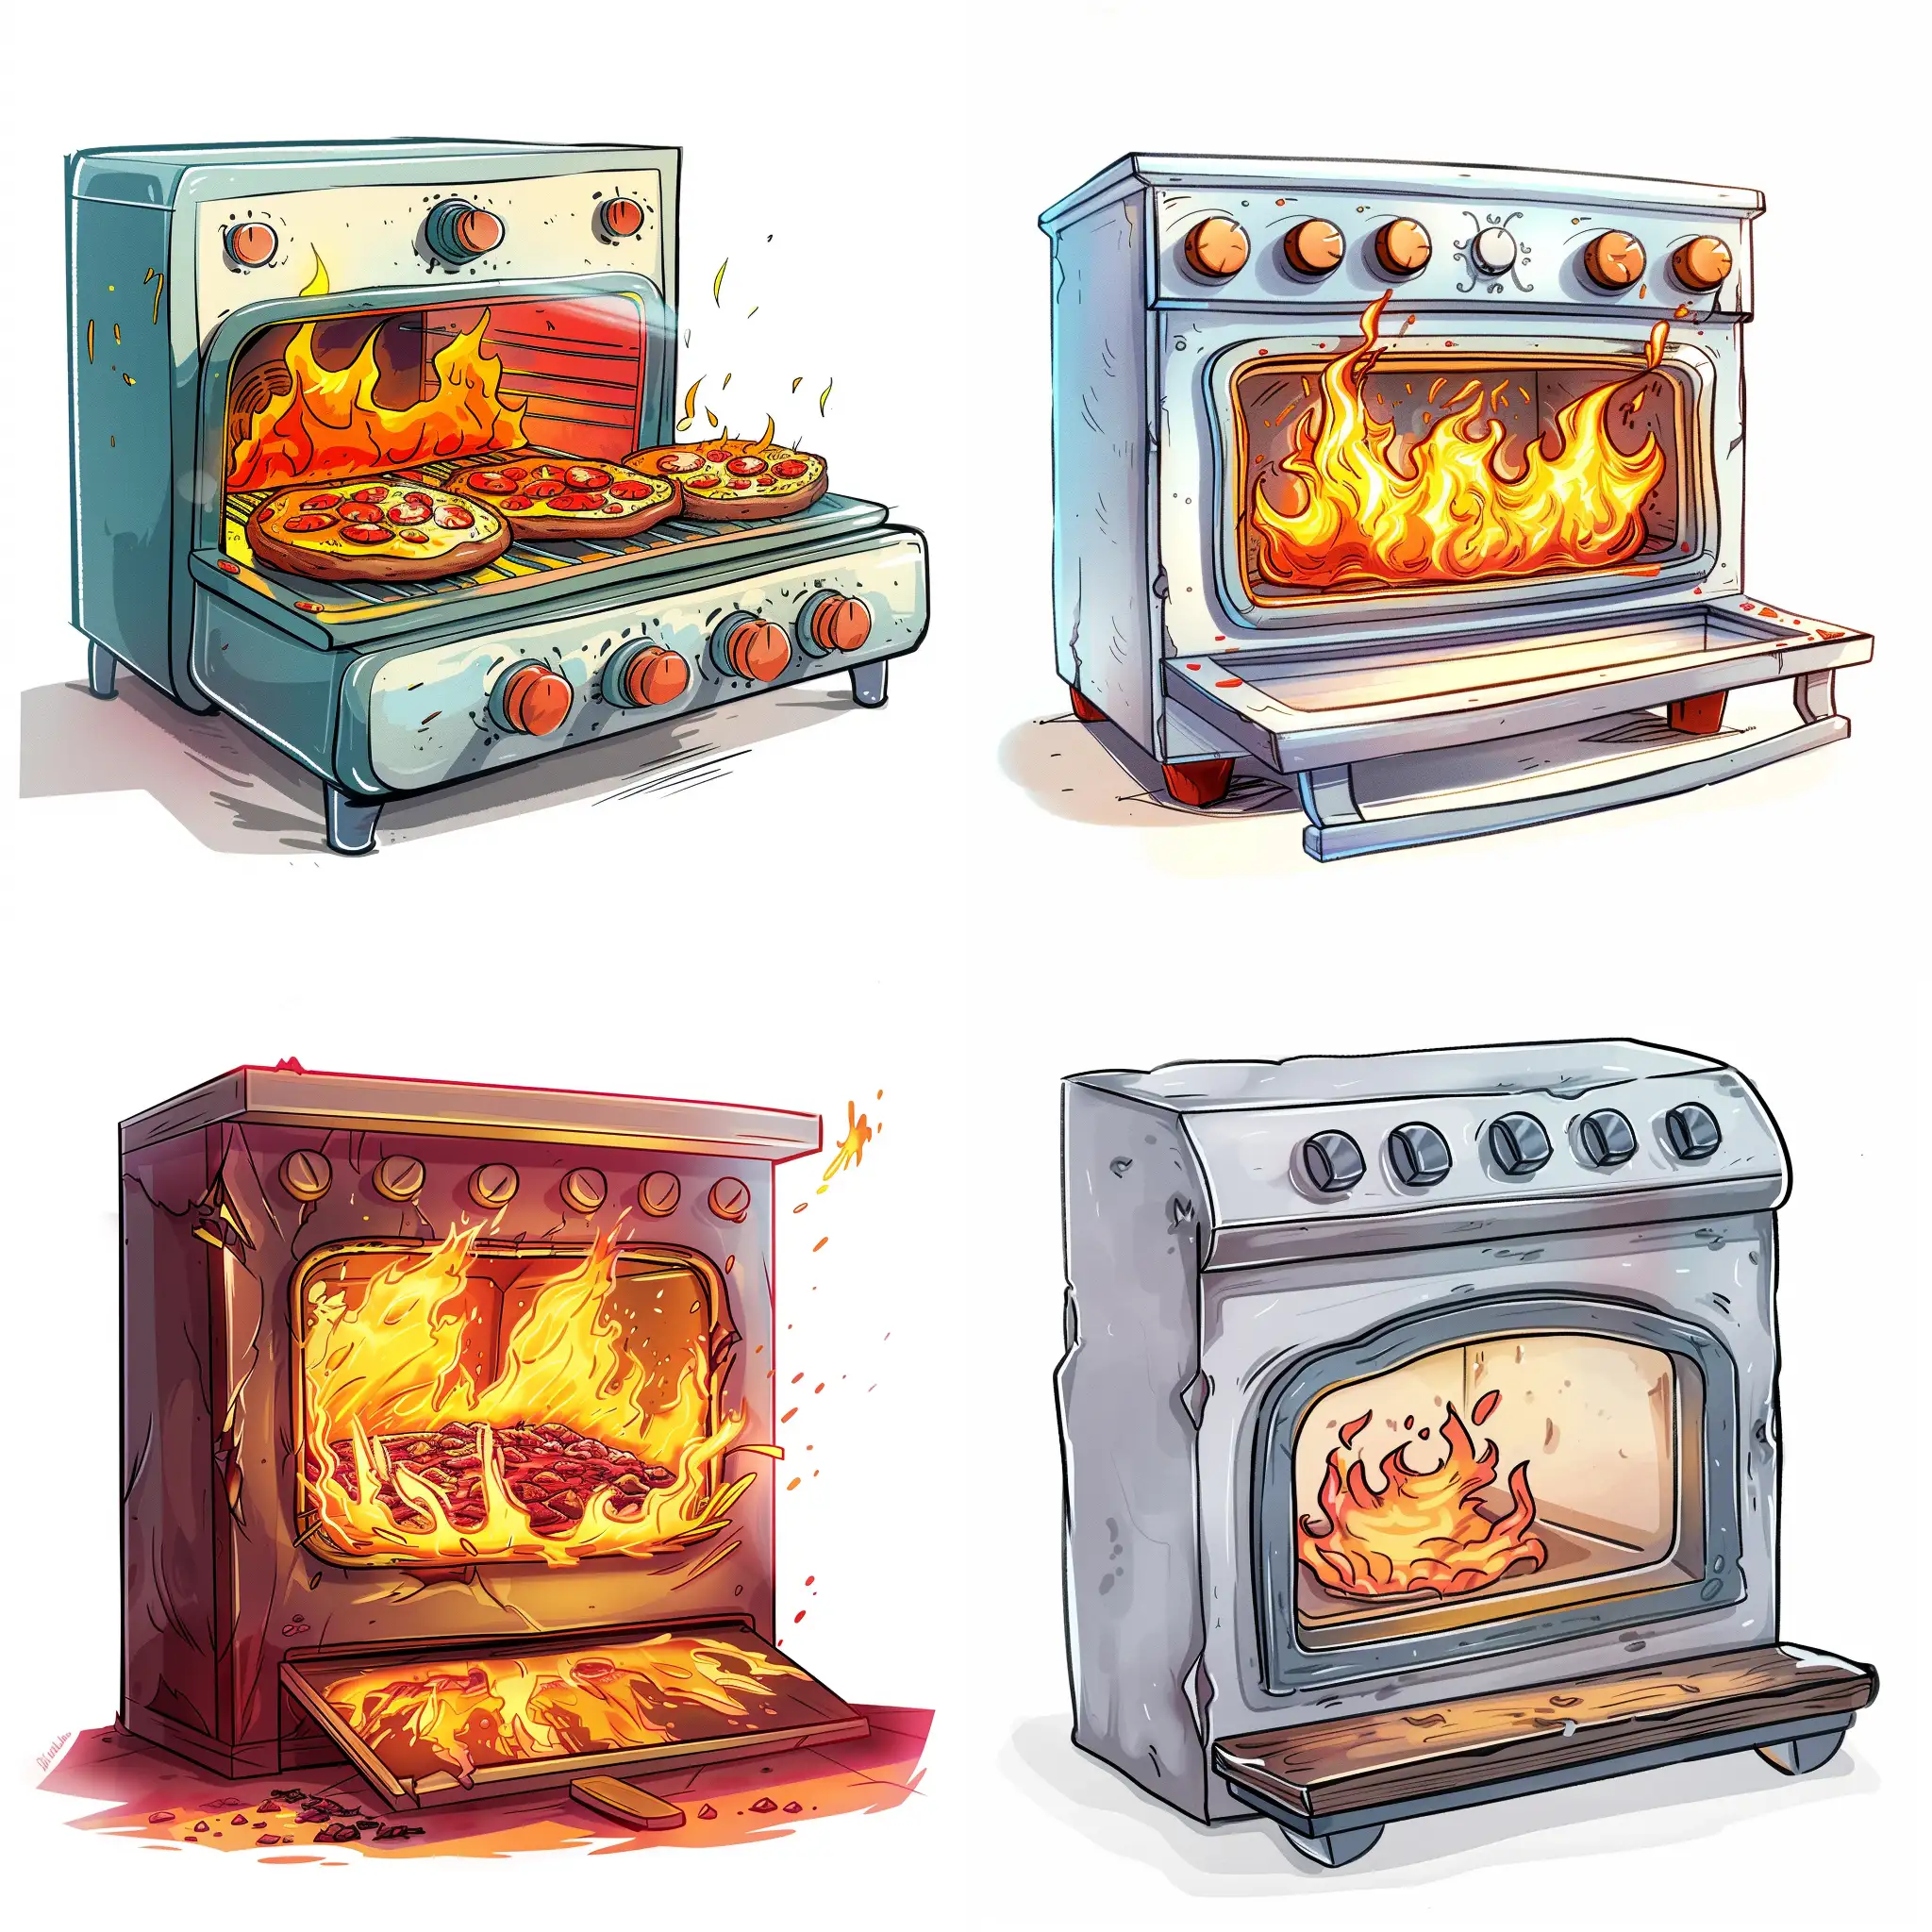 Vibrant-Oven-with-Fire-in-HyperDetailed-Comic-Cartoon-Style